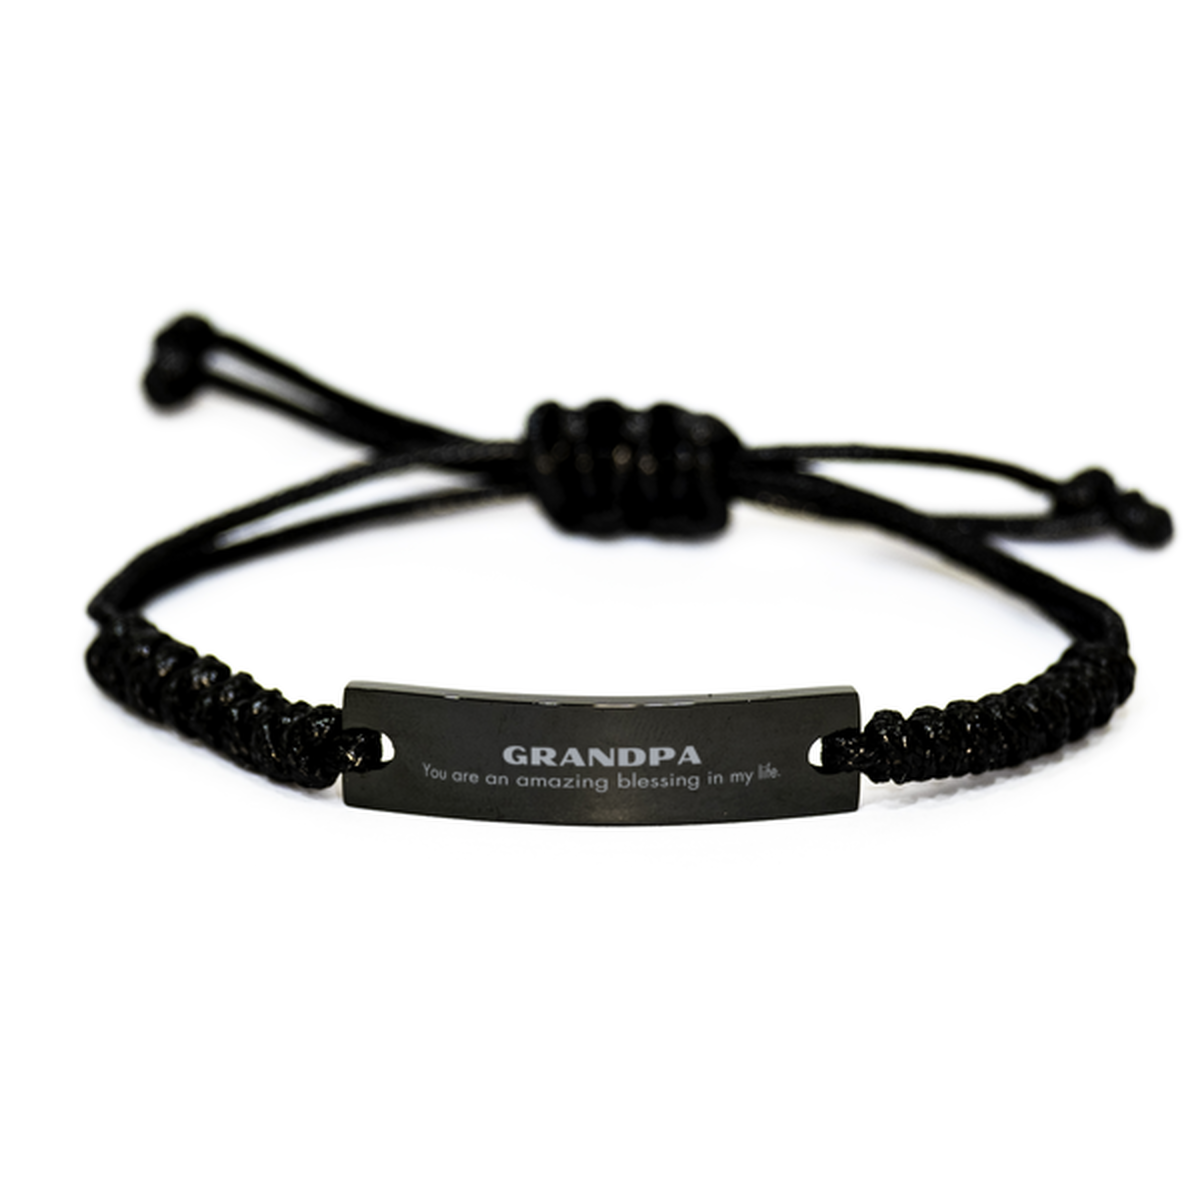 Grandpa Black Rope Bracelet, You are an amazing blessing in my life, Thank You Gifts For Grandpa, Inspirational Birthday Christmas Unique Gifts For Grandpa